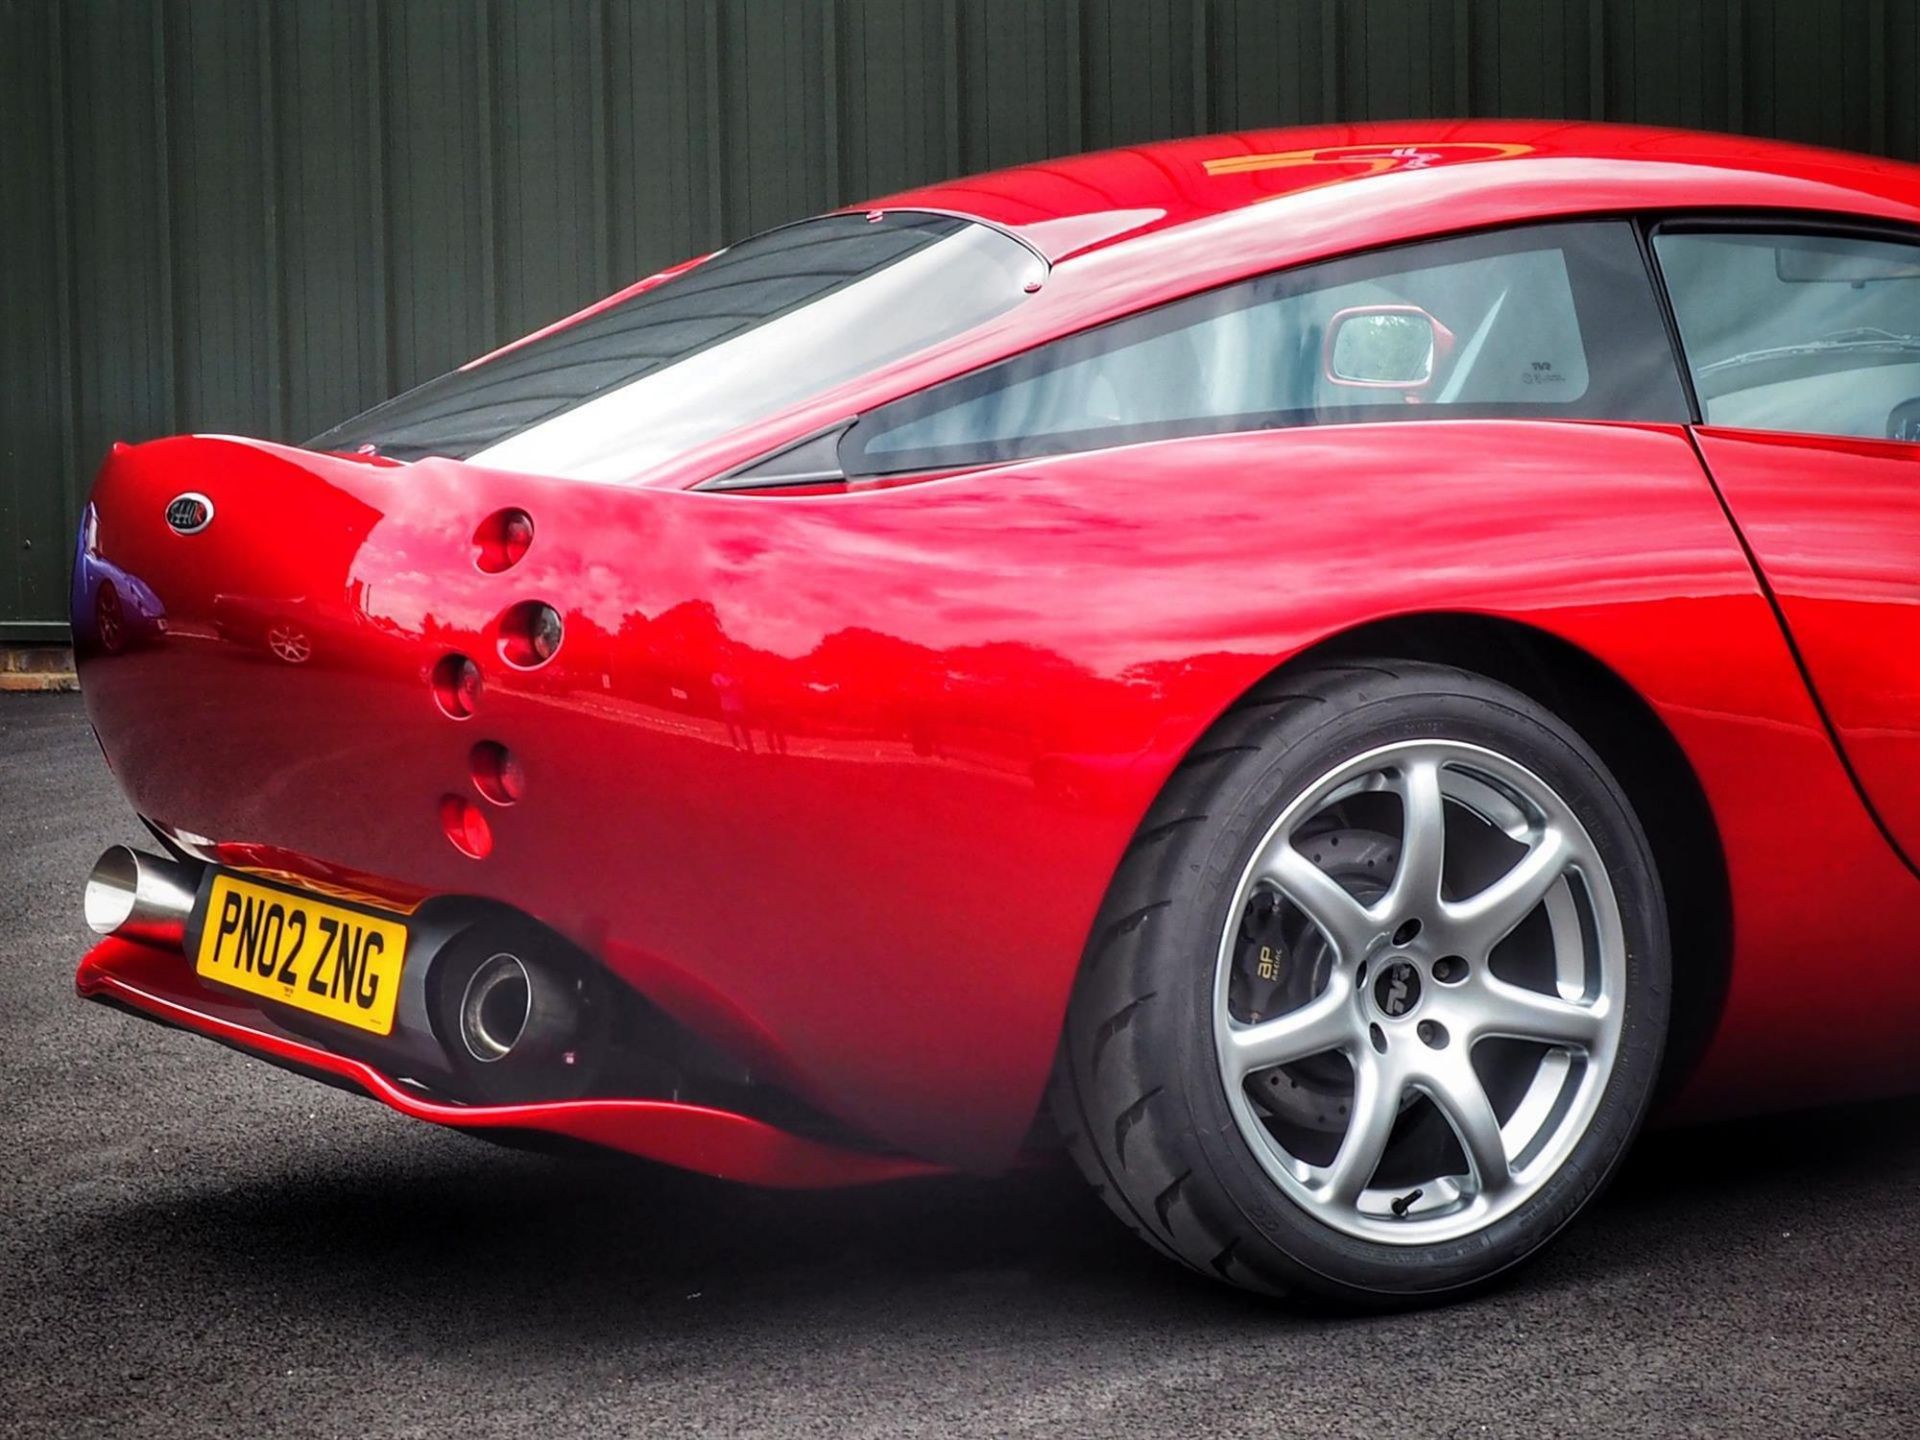 2002 TVR T440R - Image 10 of 10